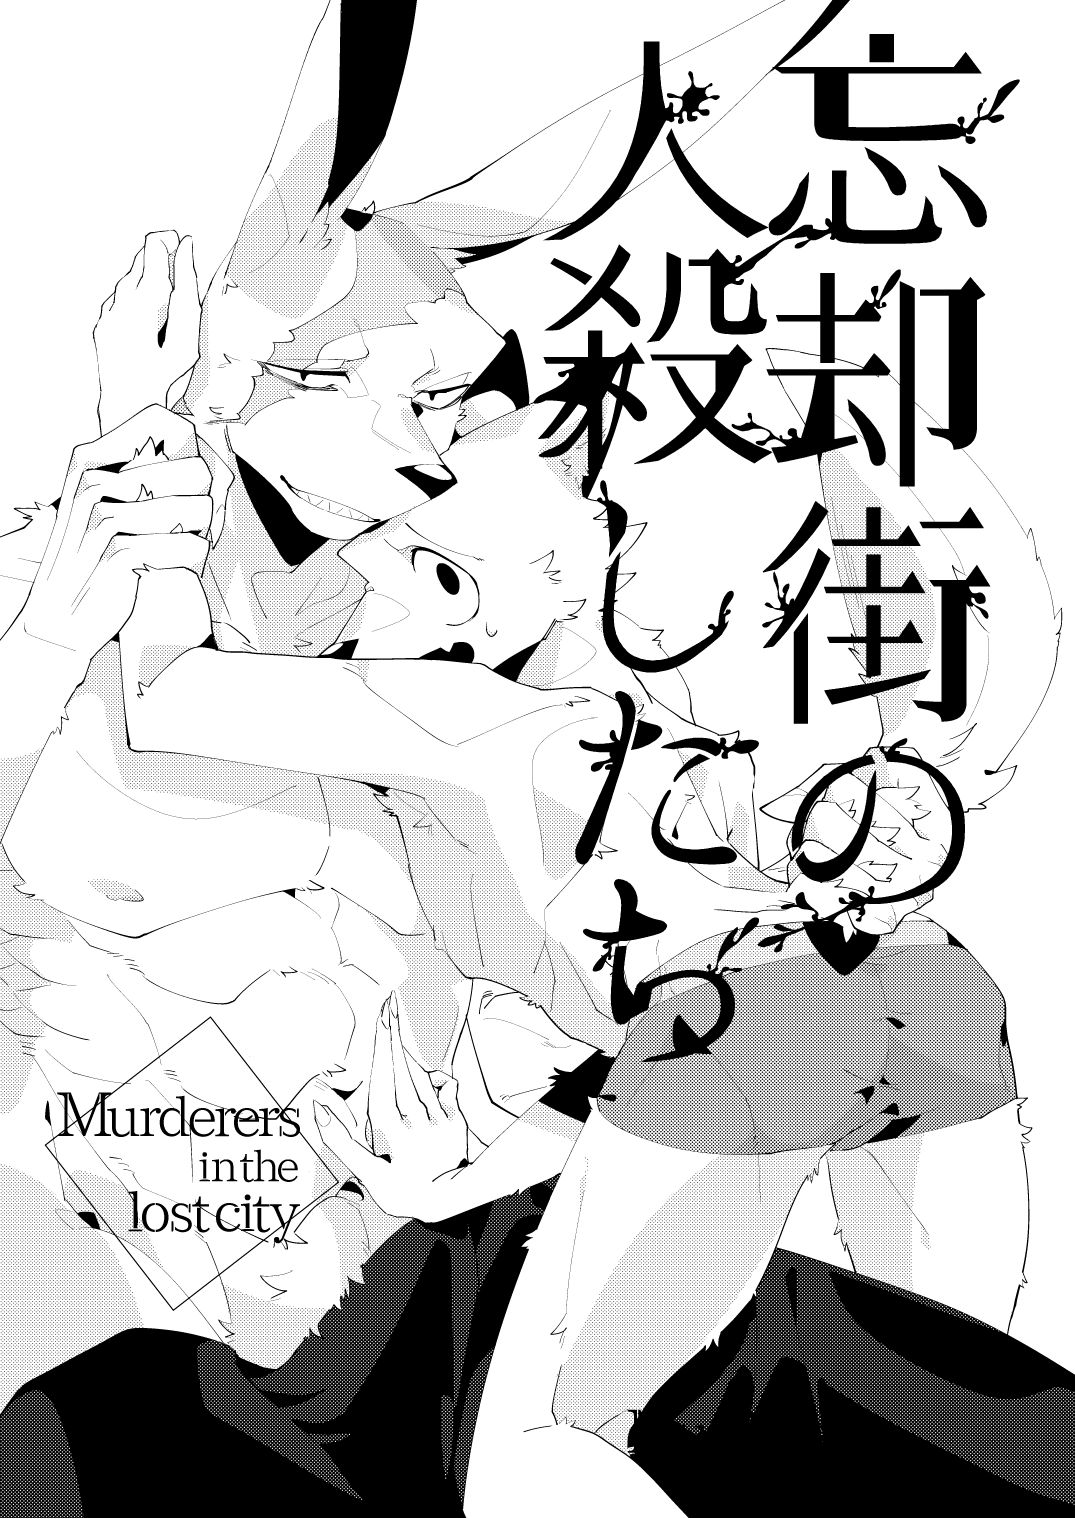 Muderers in the lost city [chapter 4] [サバカンロッタリー (弐一)] 忘却街の人殺したち #4 [DL版]